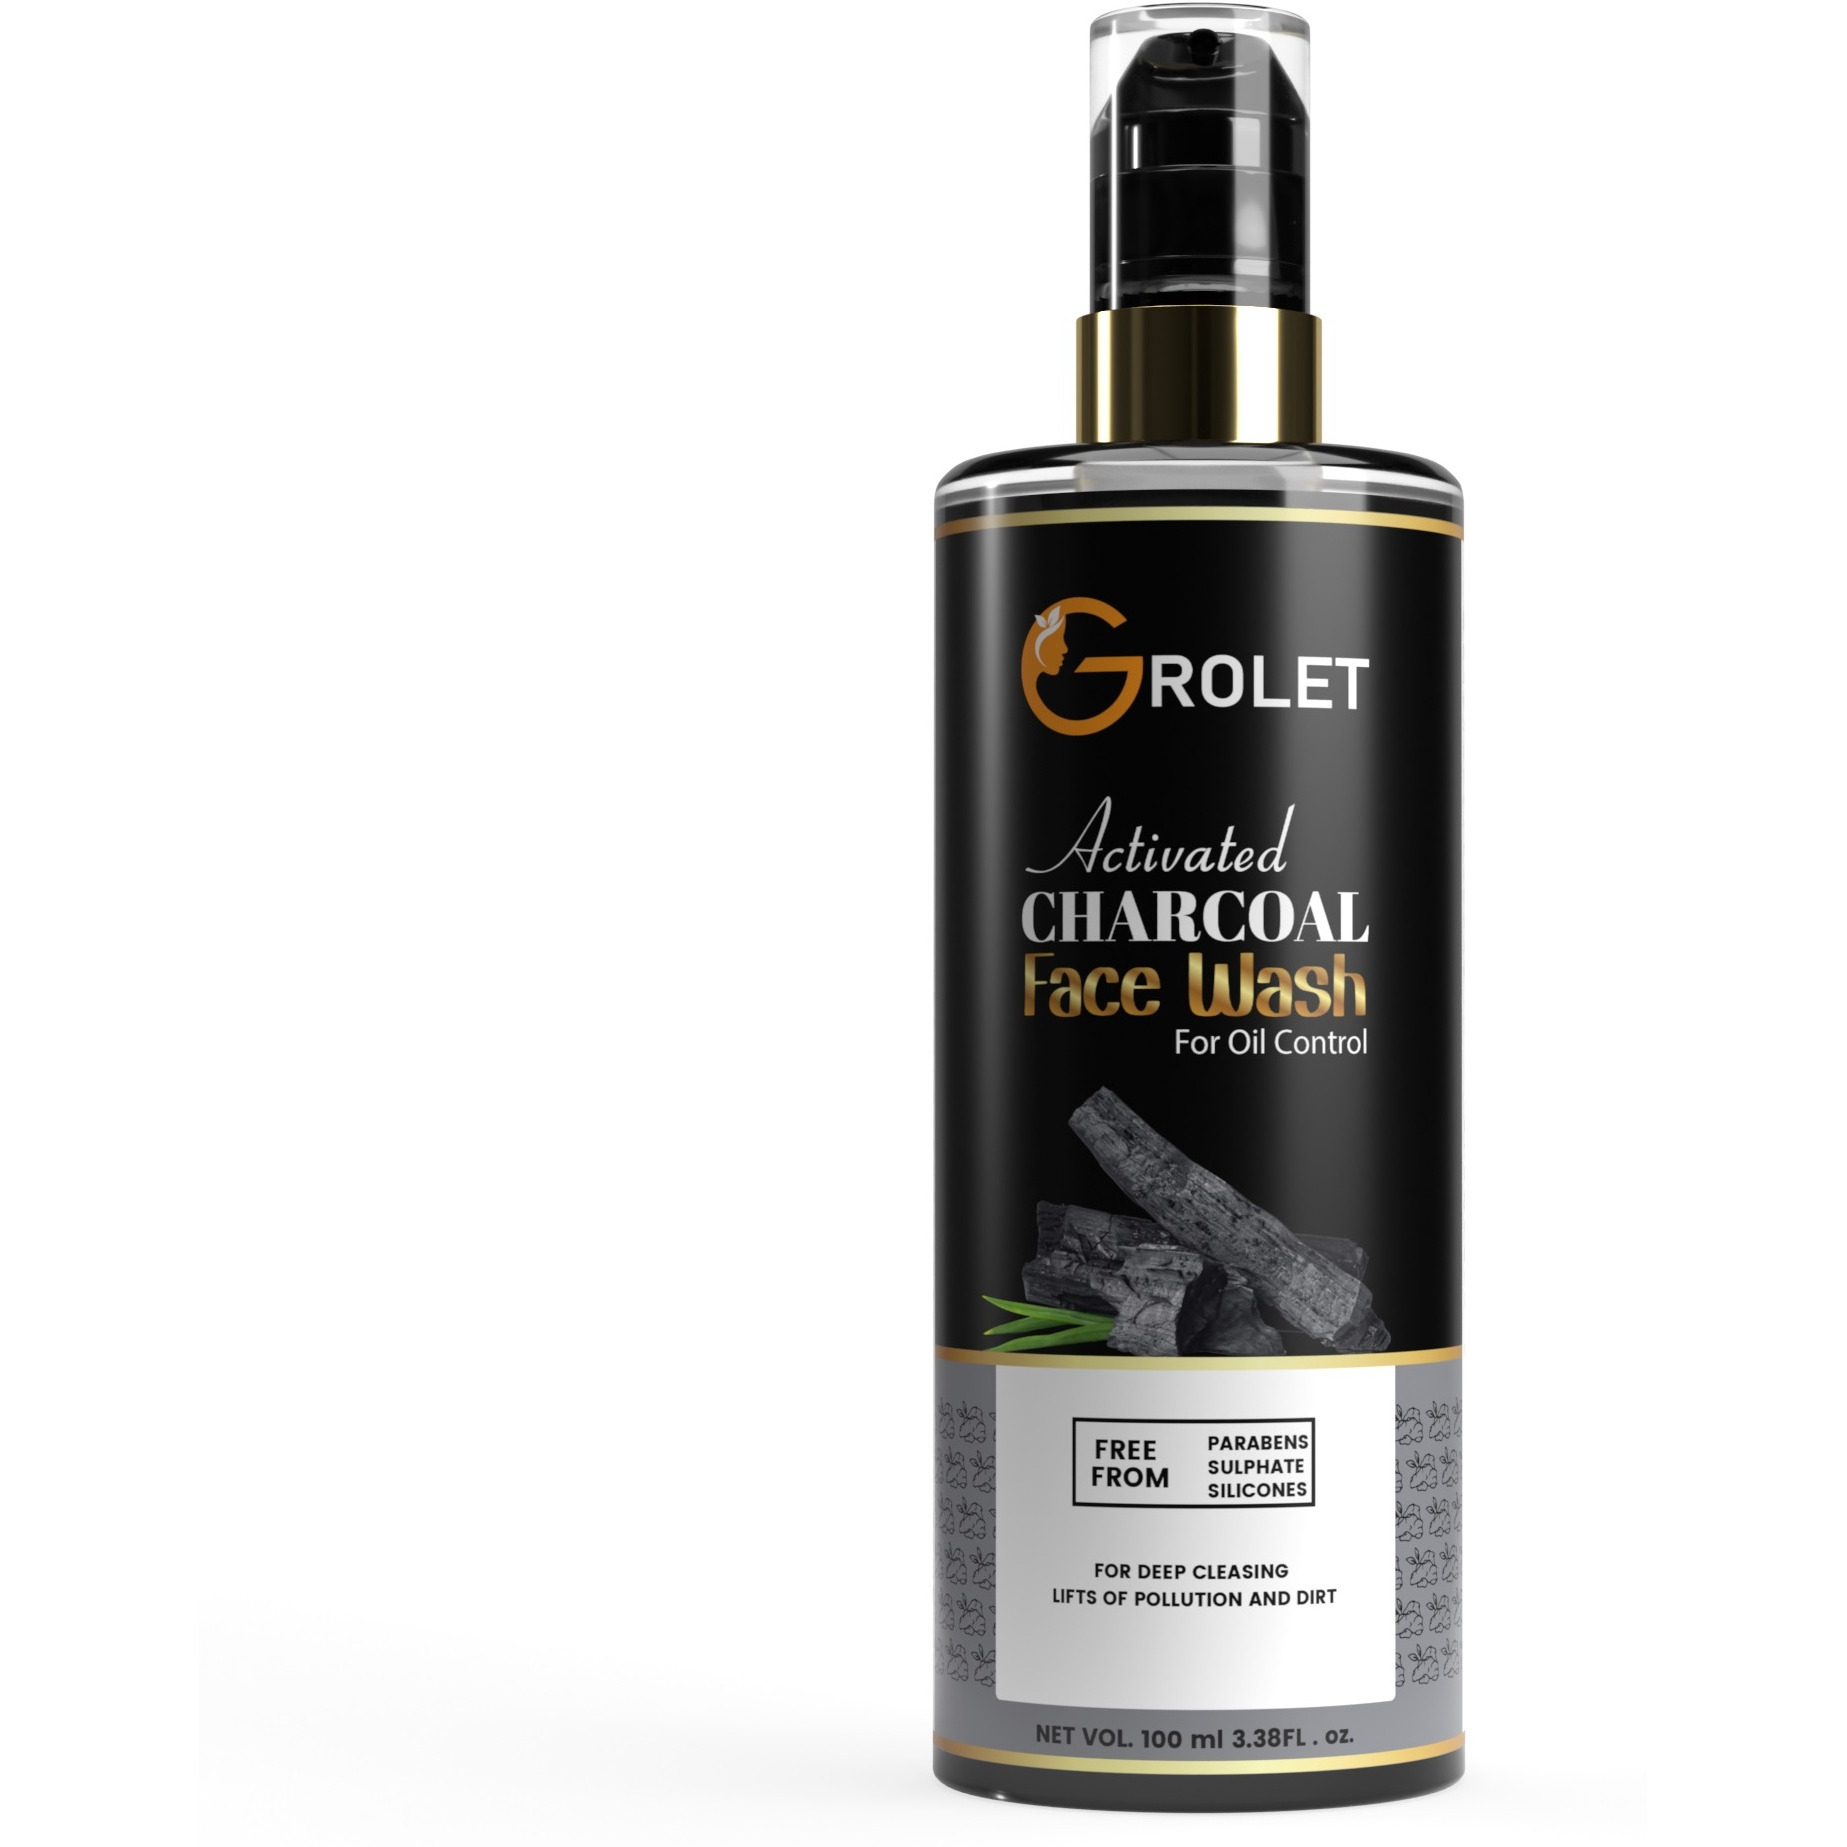 Grolet Activated Charcoal Face Wash Infused with Charcoal Mint